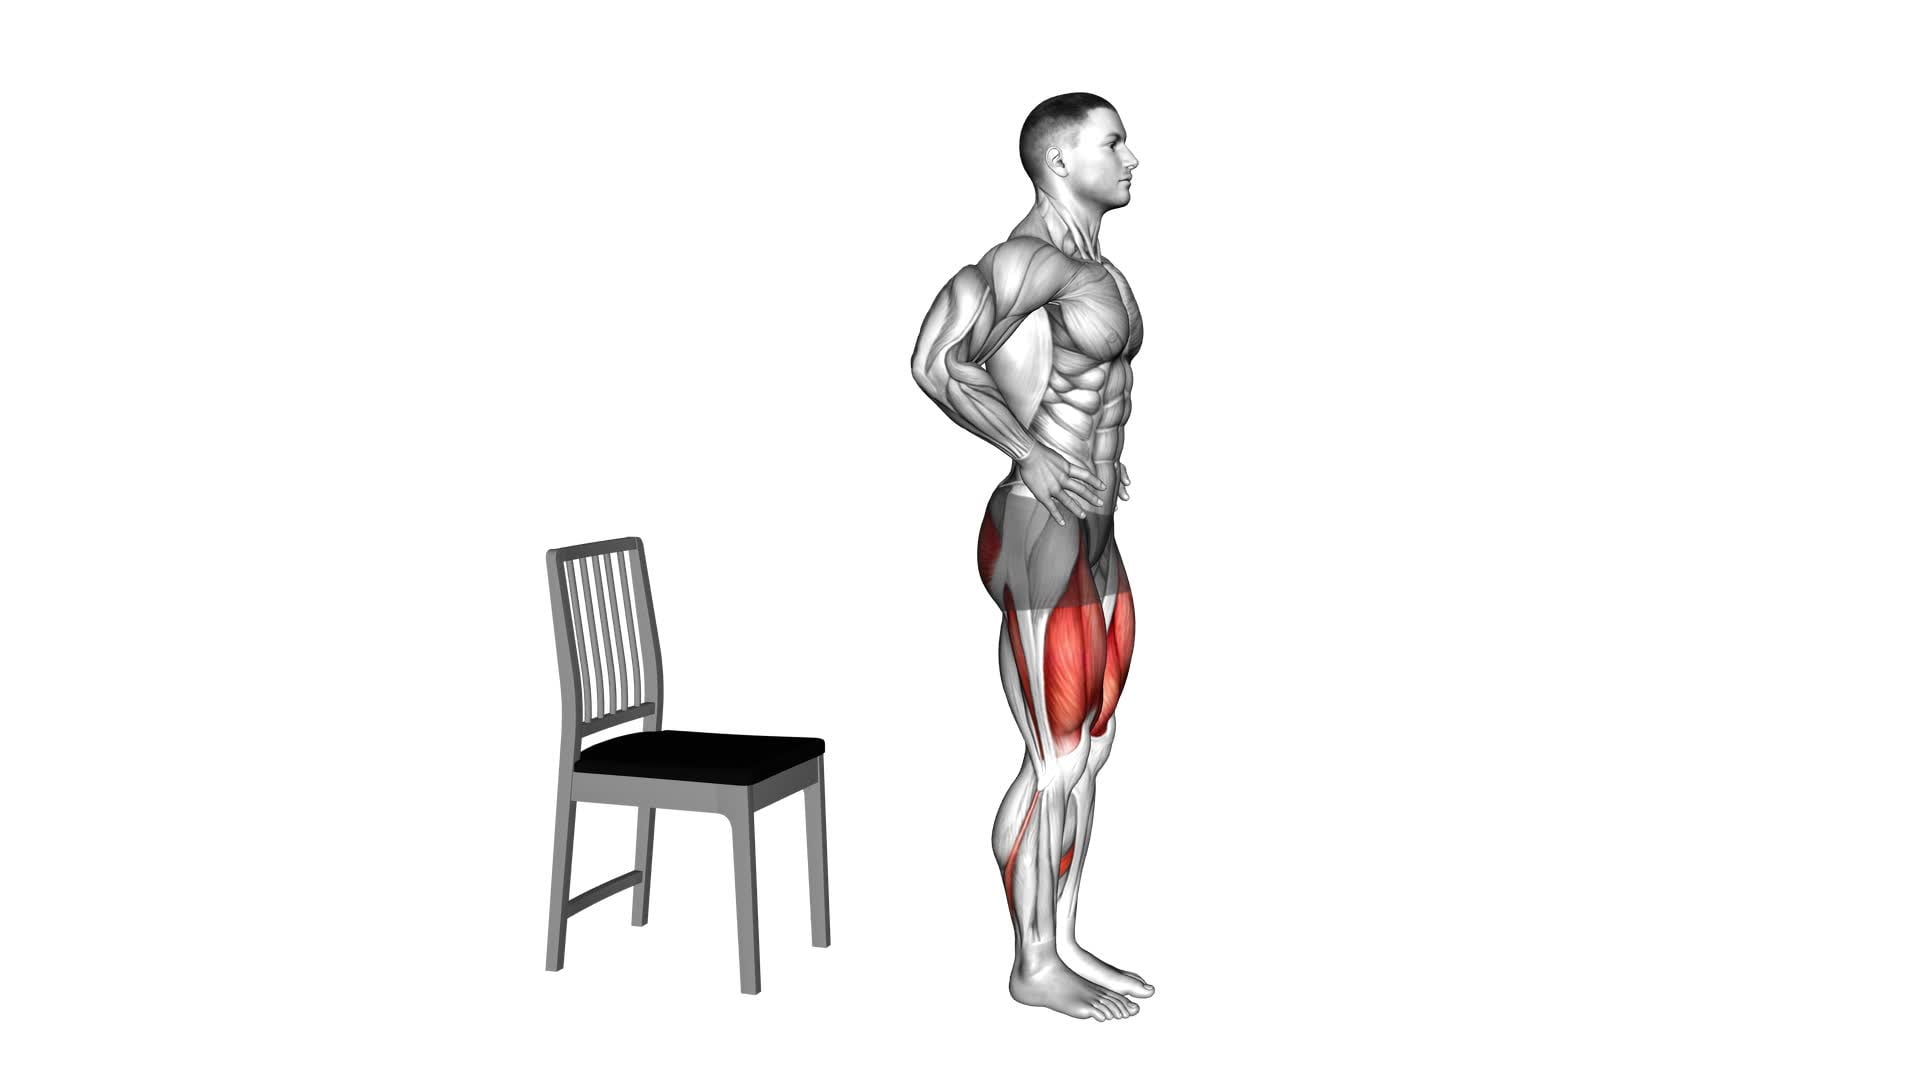 Bulgarian Split Squat With Chair - Video Exercise Guide & Tips